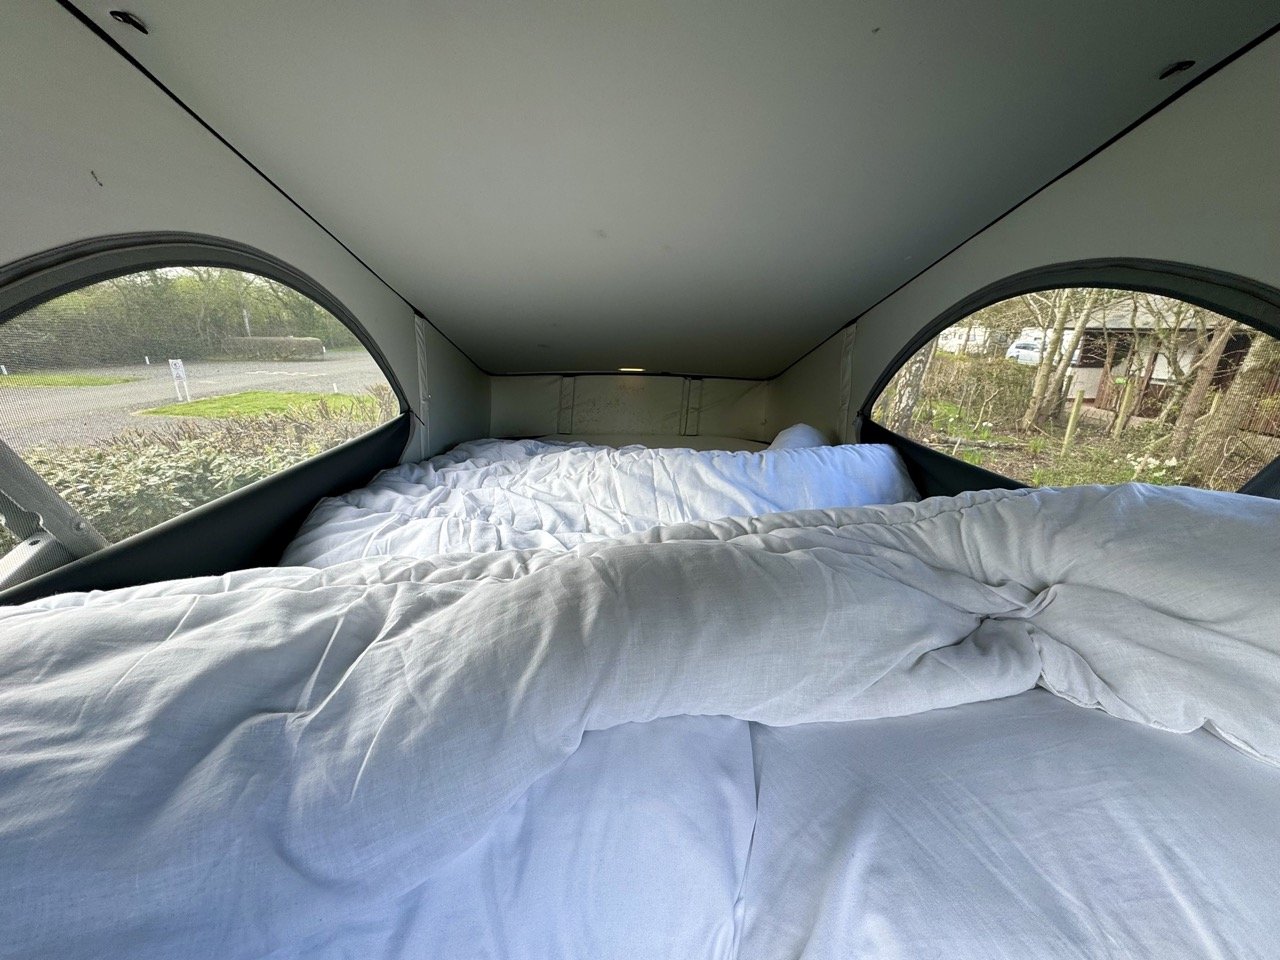 The pop-up roof sleeping area